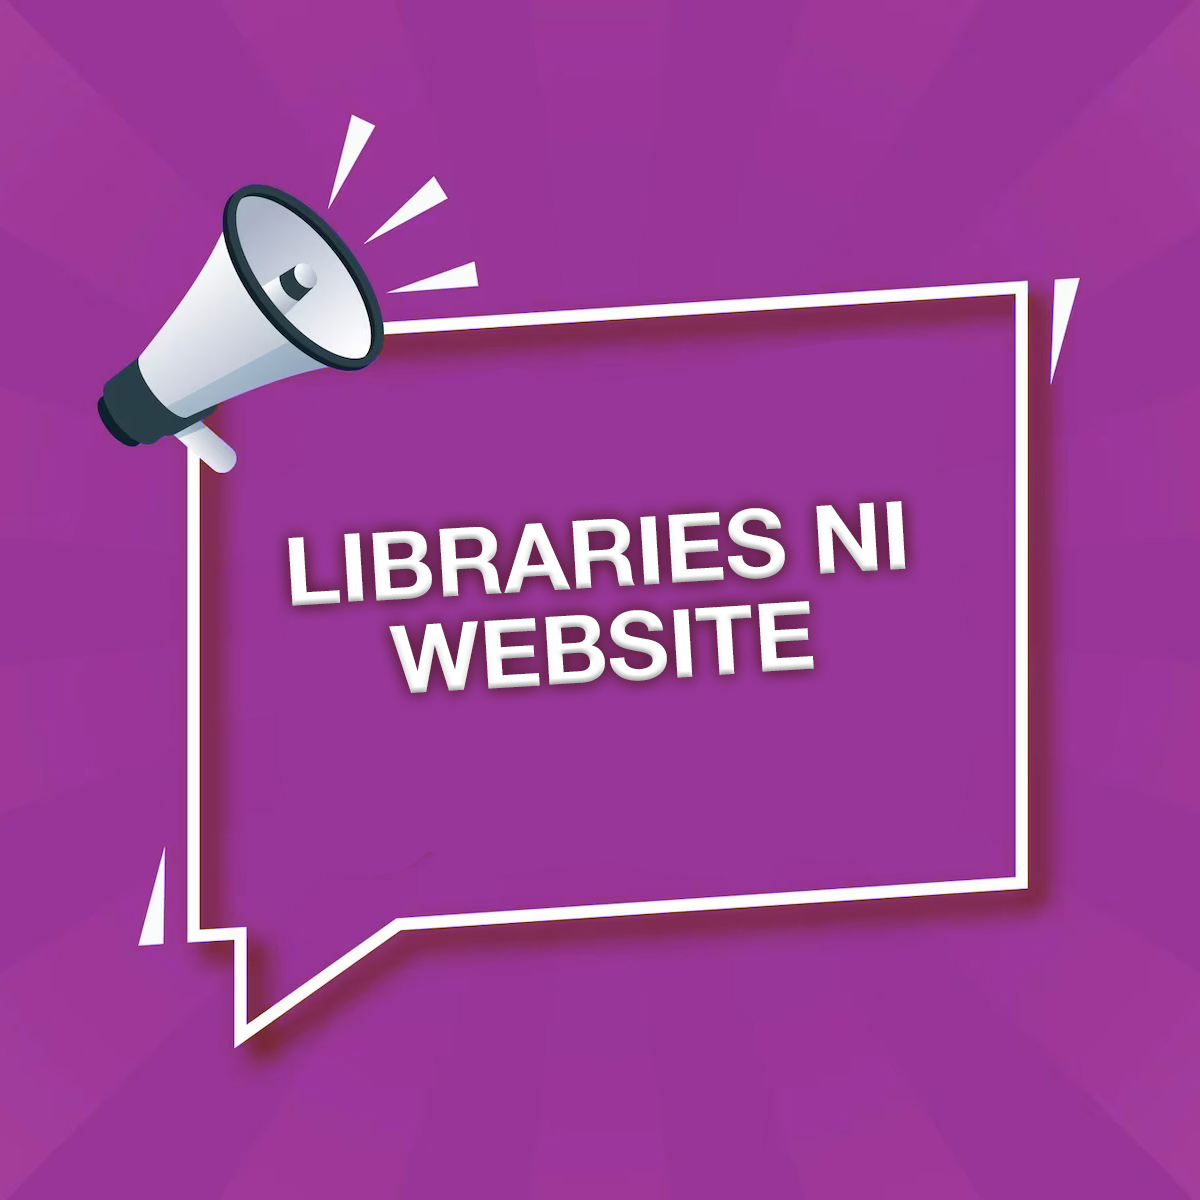 📢 CUSTOMER NOTICE - Libraries NI Website 📢 The Libraries NI website will be unavailable on Wednesday 8 May from 10:00pm until midnight to facilitate upgrades. We apologise for any inconvenience. Libby and BorrowBox will still be available at this time.